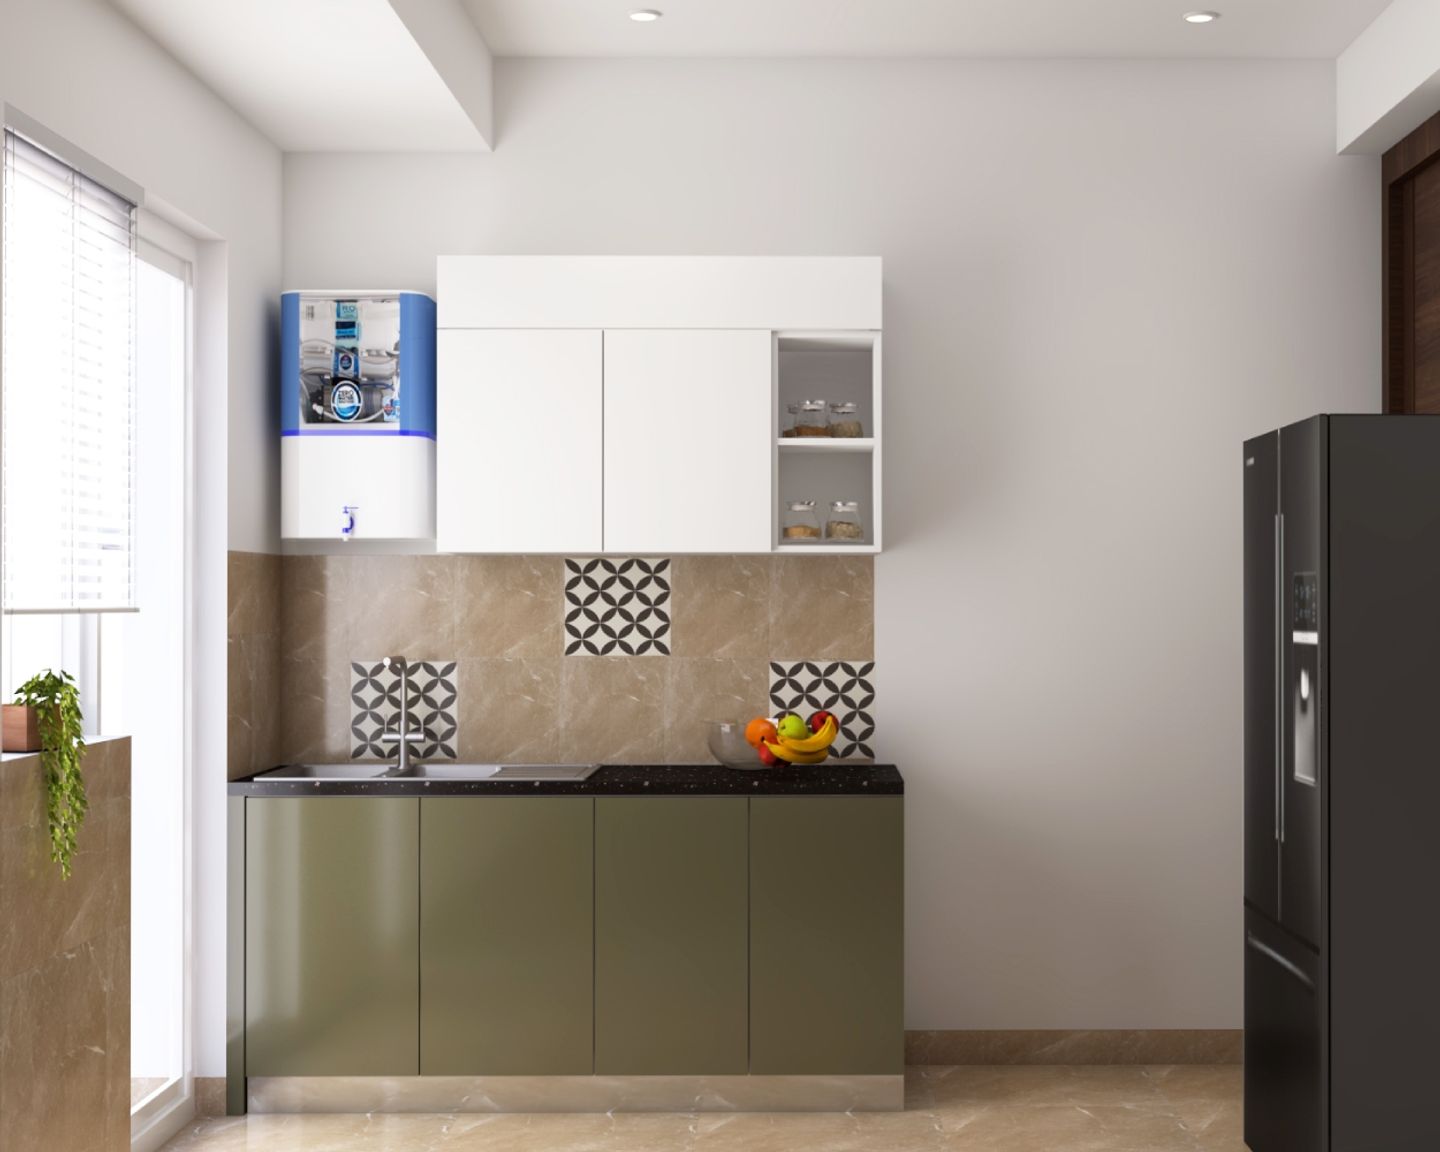 Modern Modular Parallel Kitchen Design With Green And Frosty White Cabinets